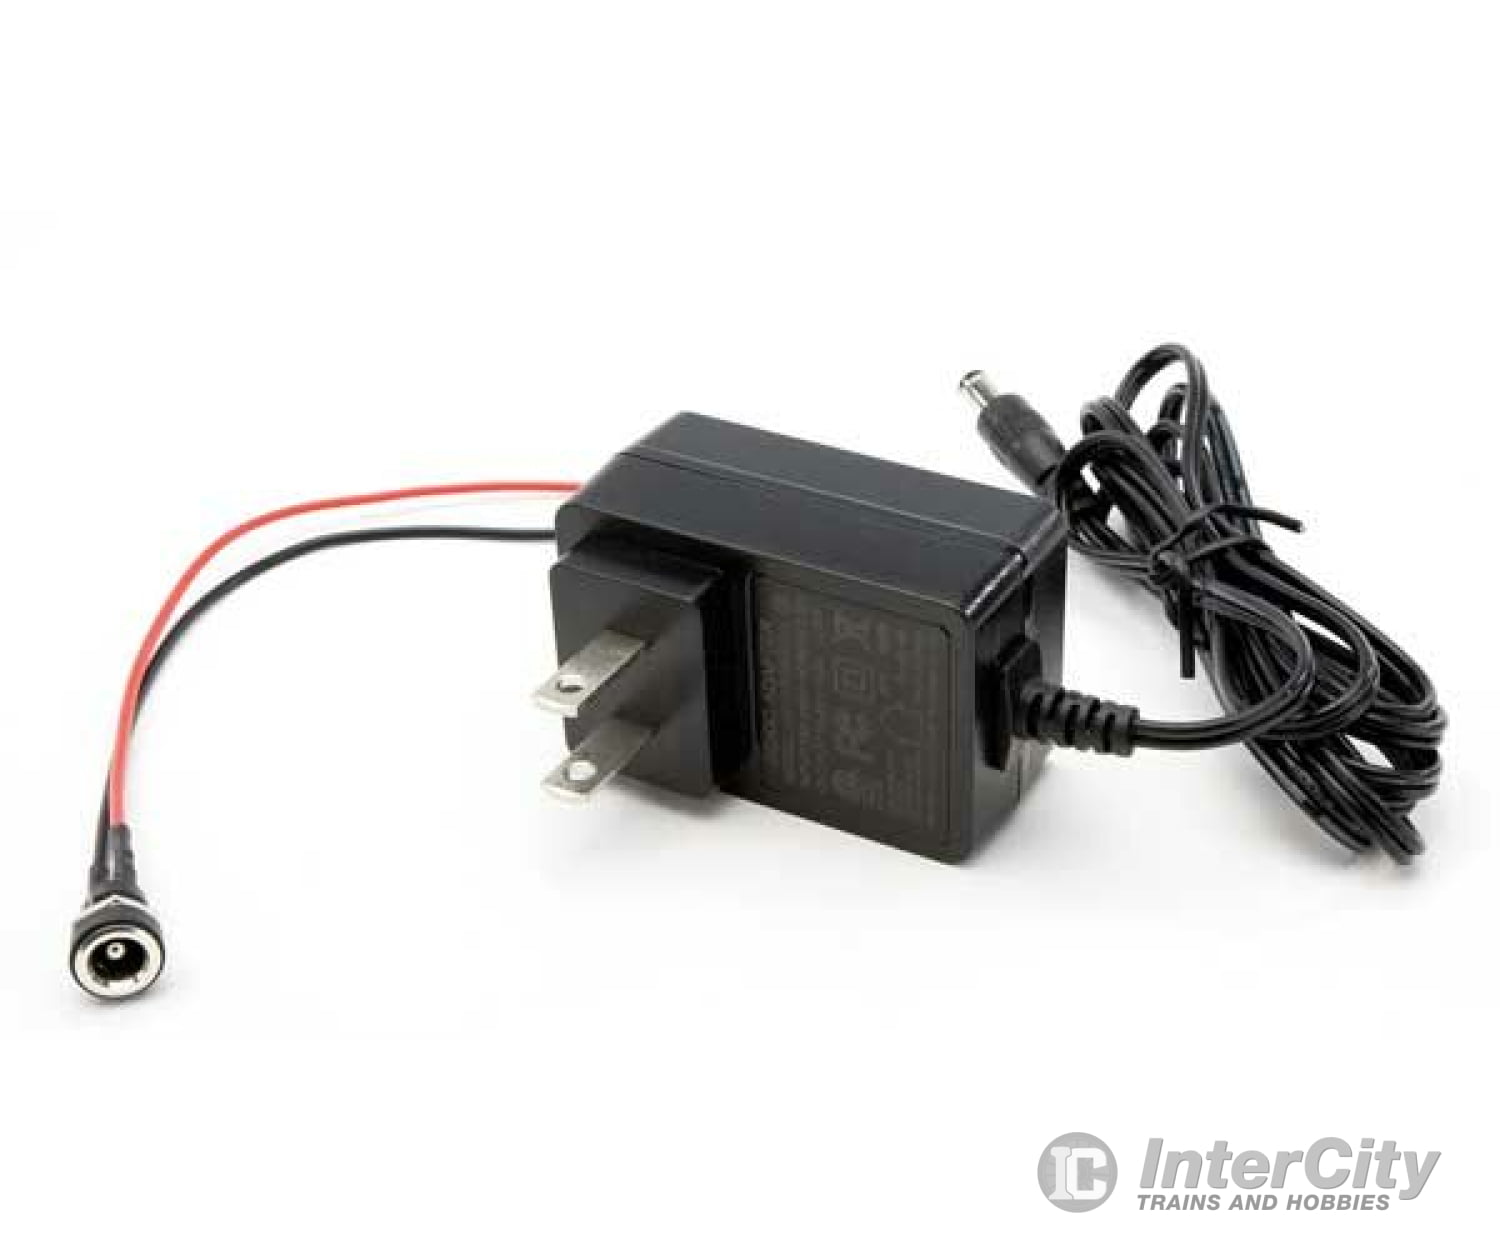 Walthers Cornerstone 2858 Turntable Power Supply For Turntables -- 800Ma 16V Dc Output Track